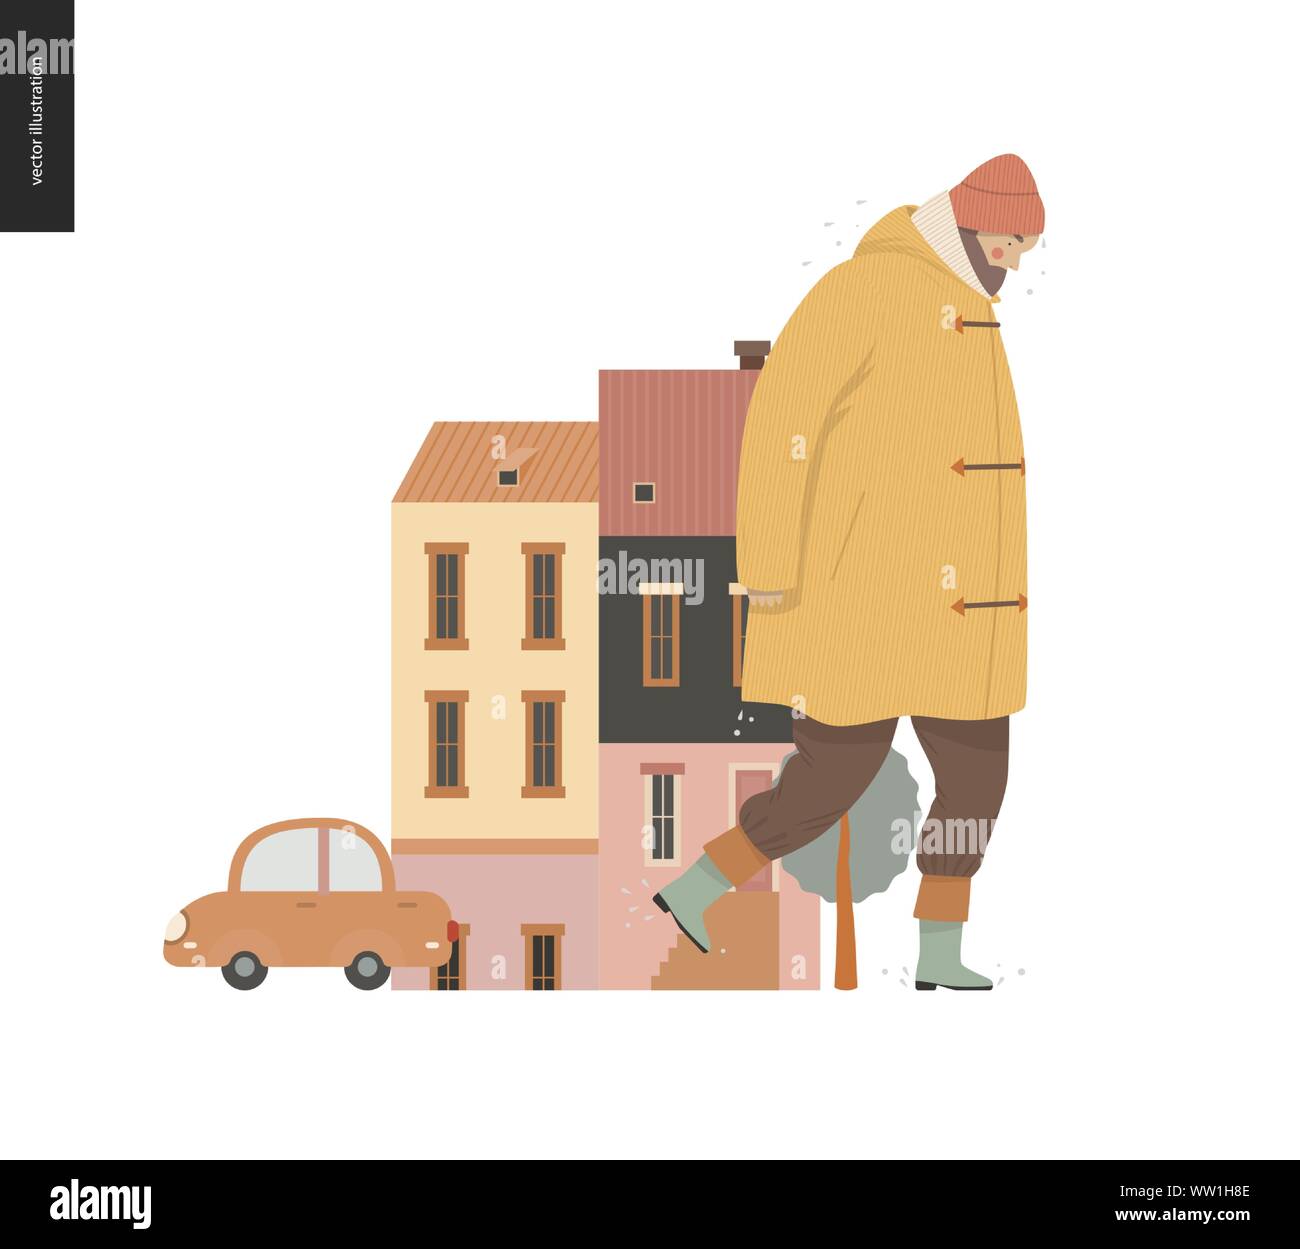 Rain - walking man -modern flat vector concept illustration of a an adult bearded man wearing a coat, a wool cap and boots, walking under the rain in Stock Vector